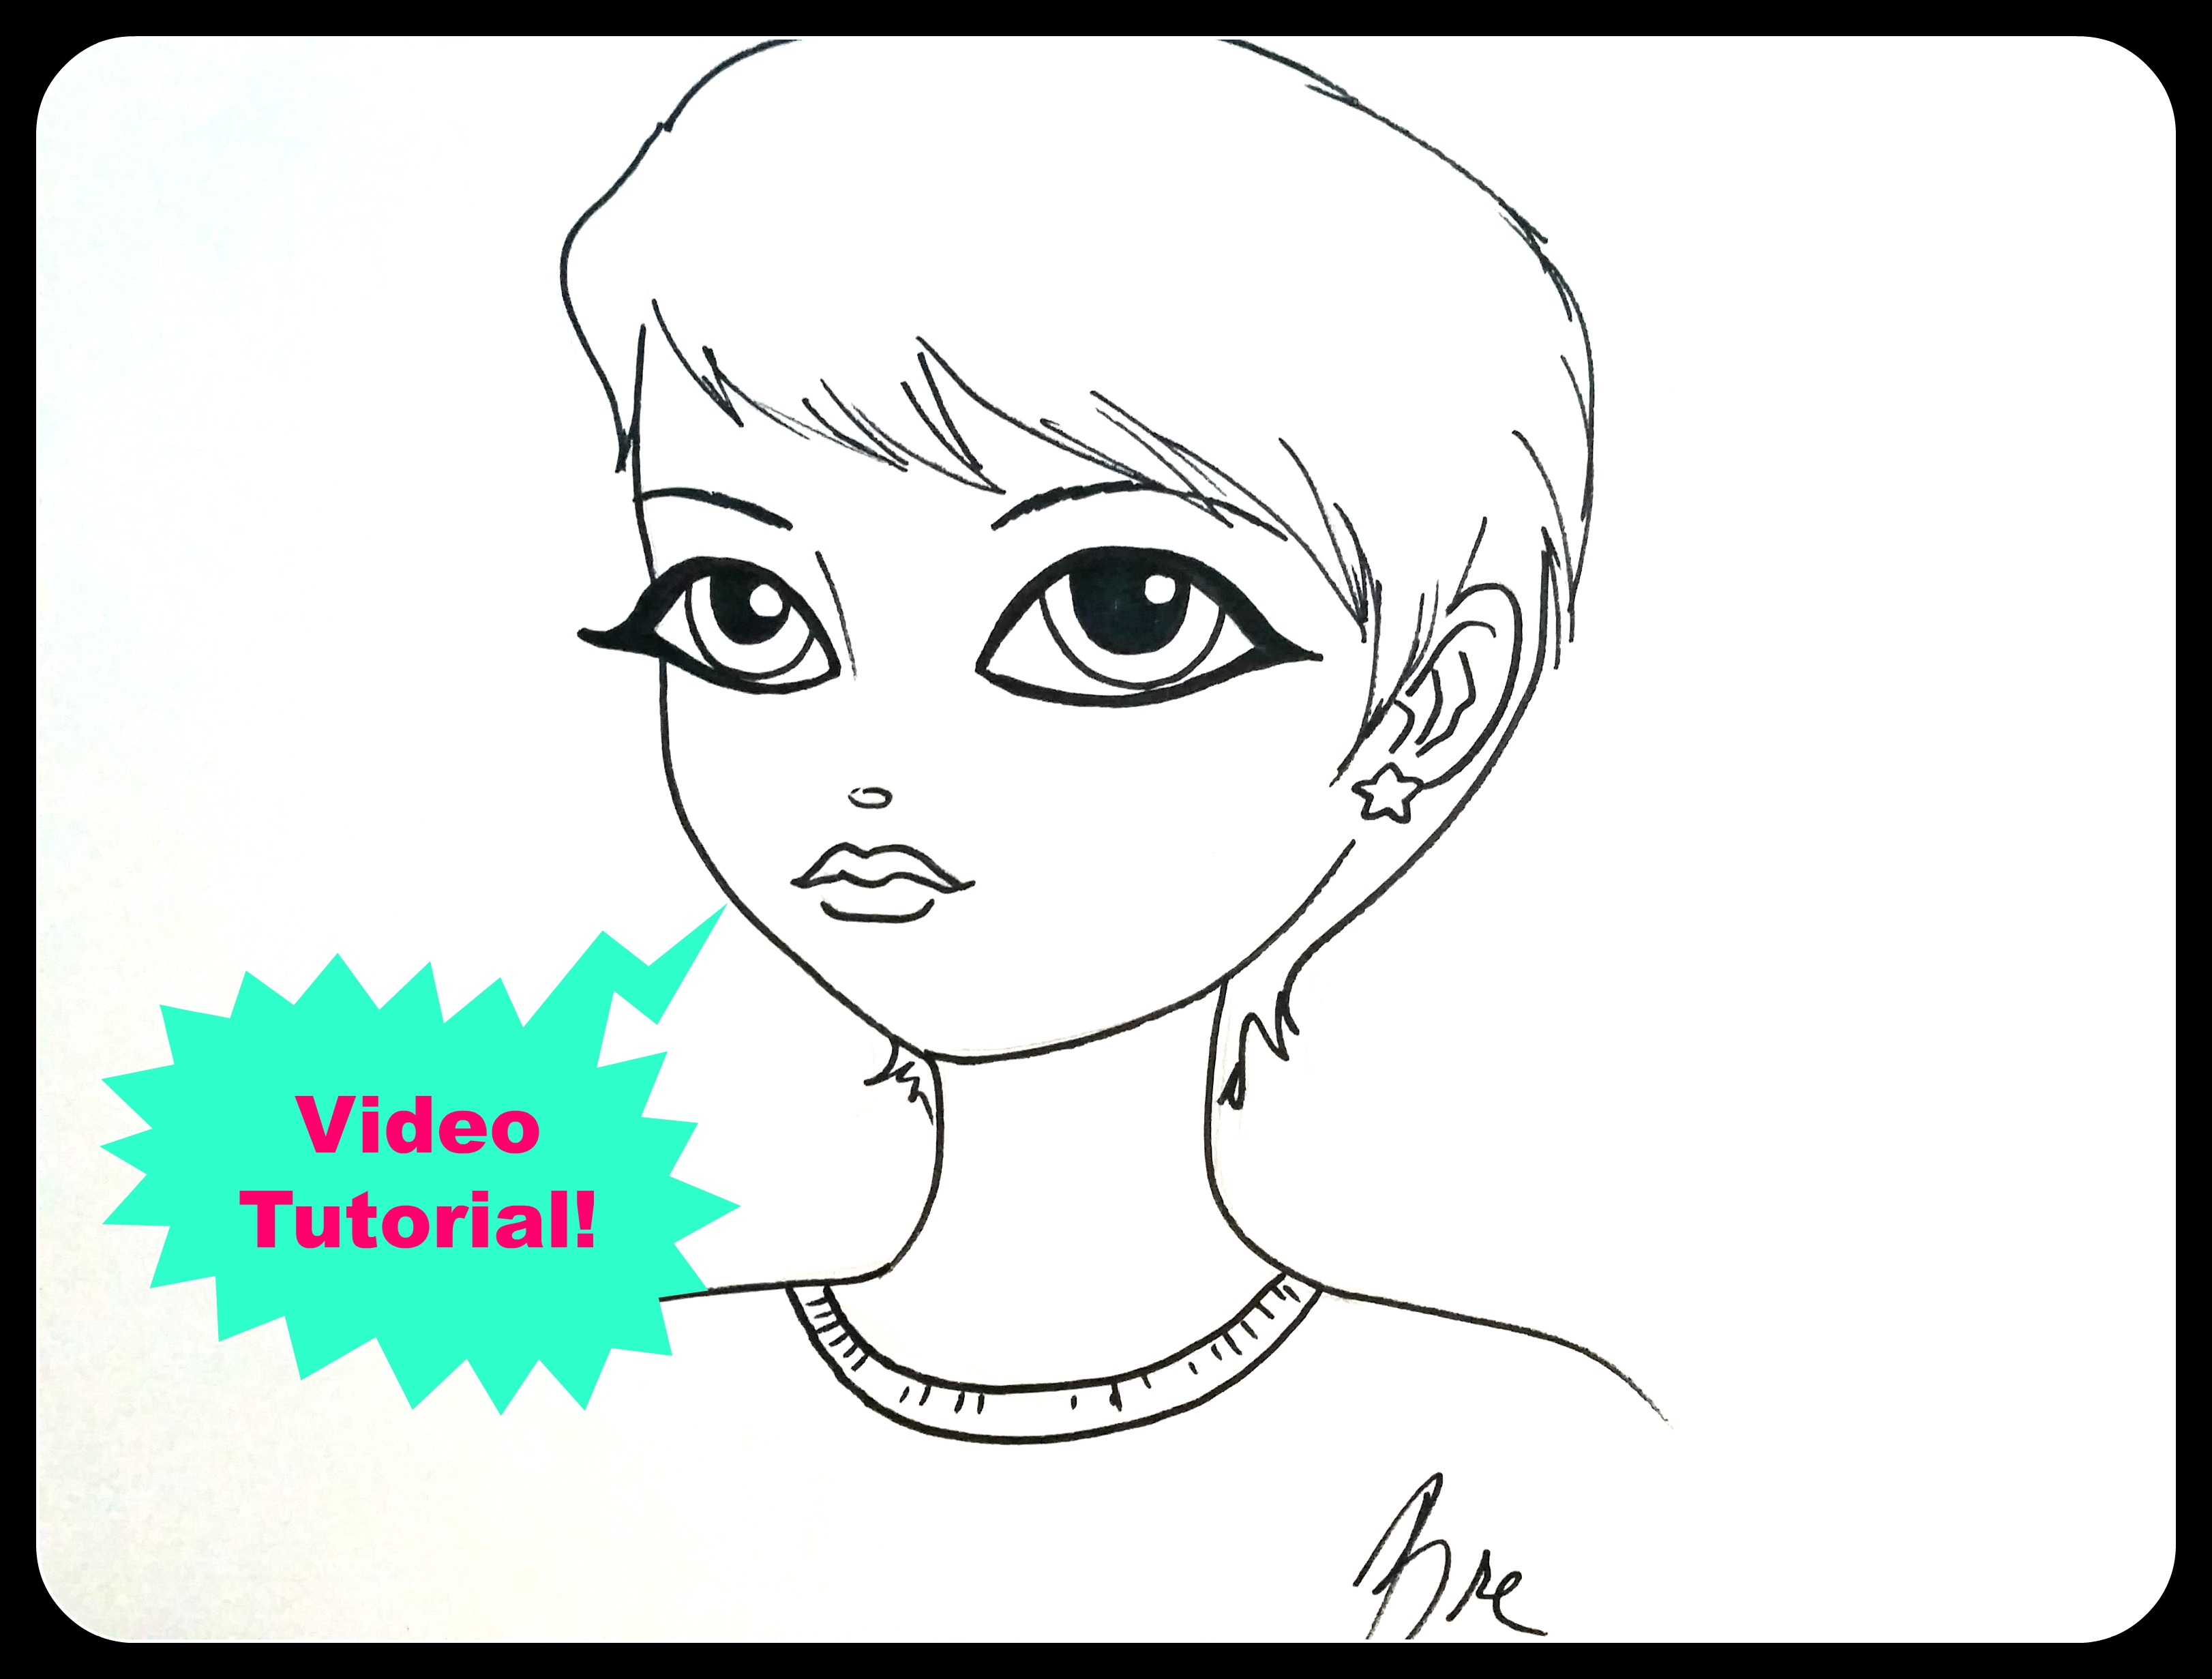 video tutorial: how to draw a big-eyed girl